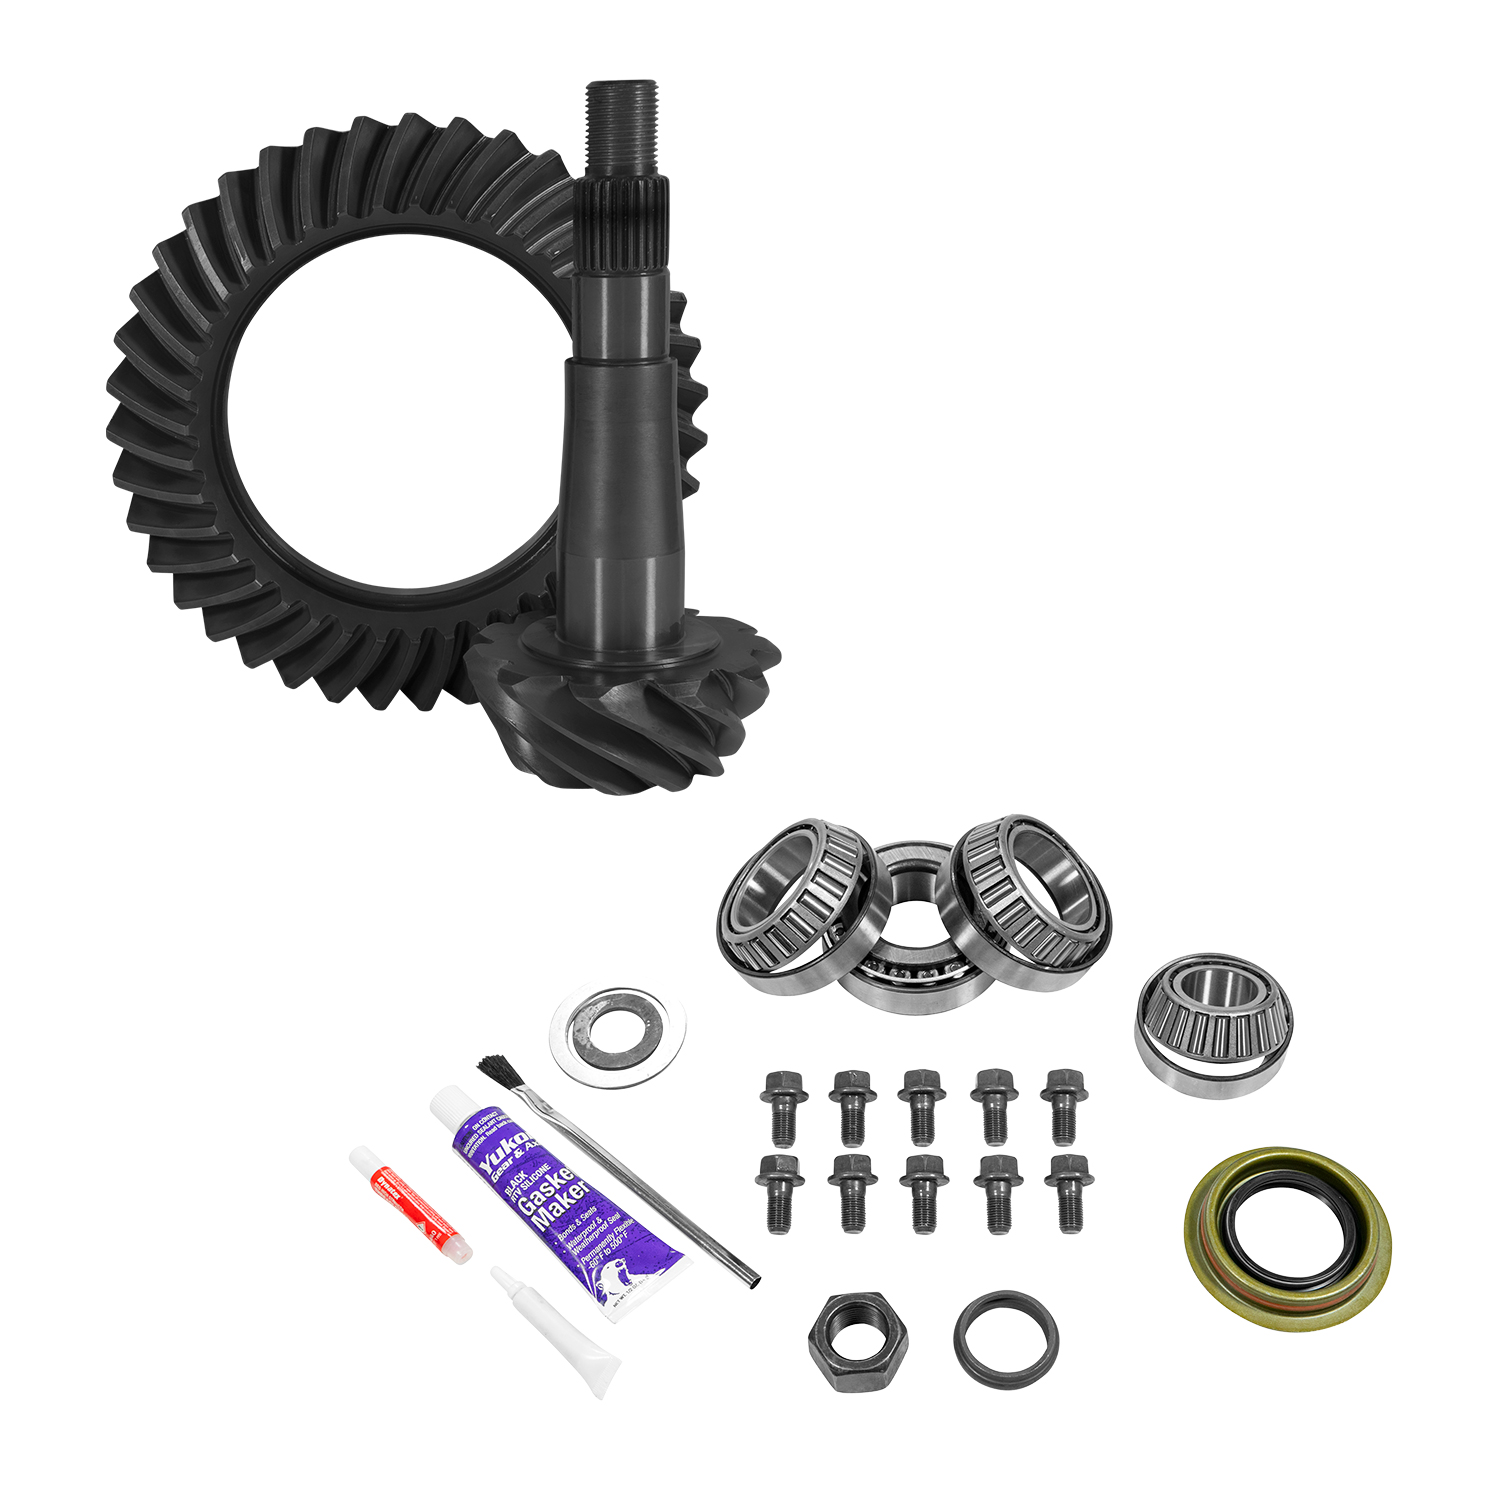 USA Standard 10658 8.25 in./ 213Mm Chy 4.11 Rear Ring & Pinion And Install Kit